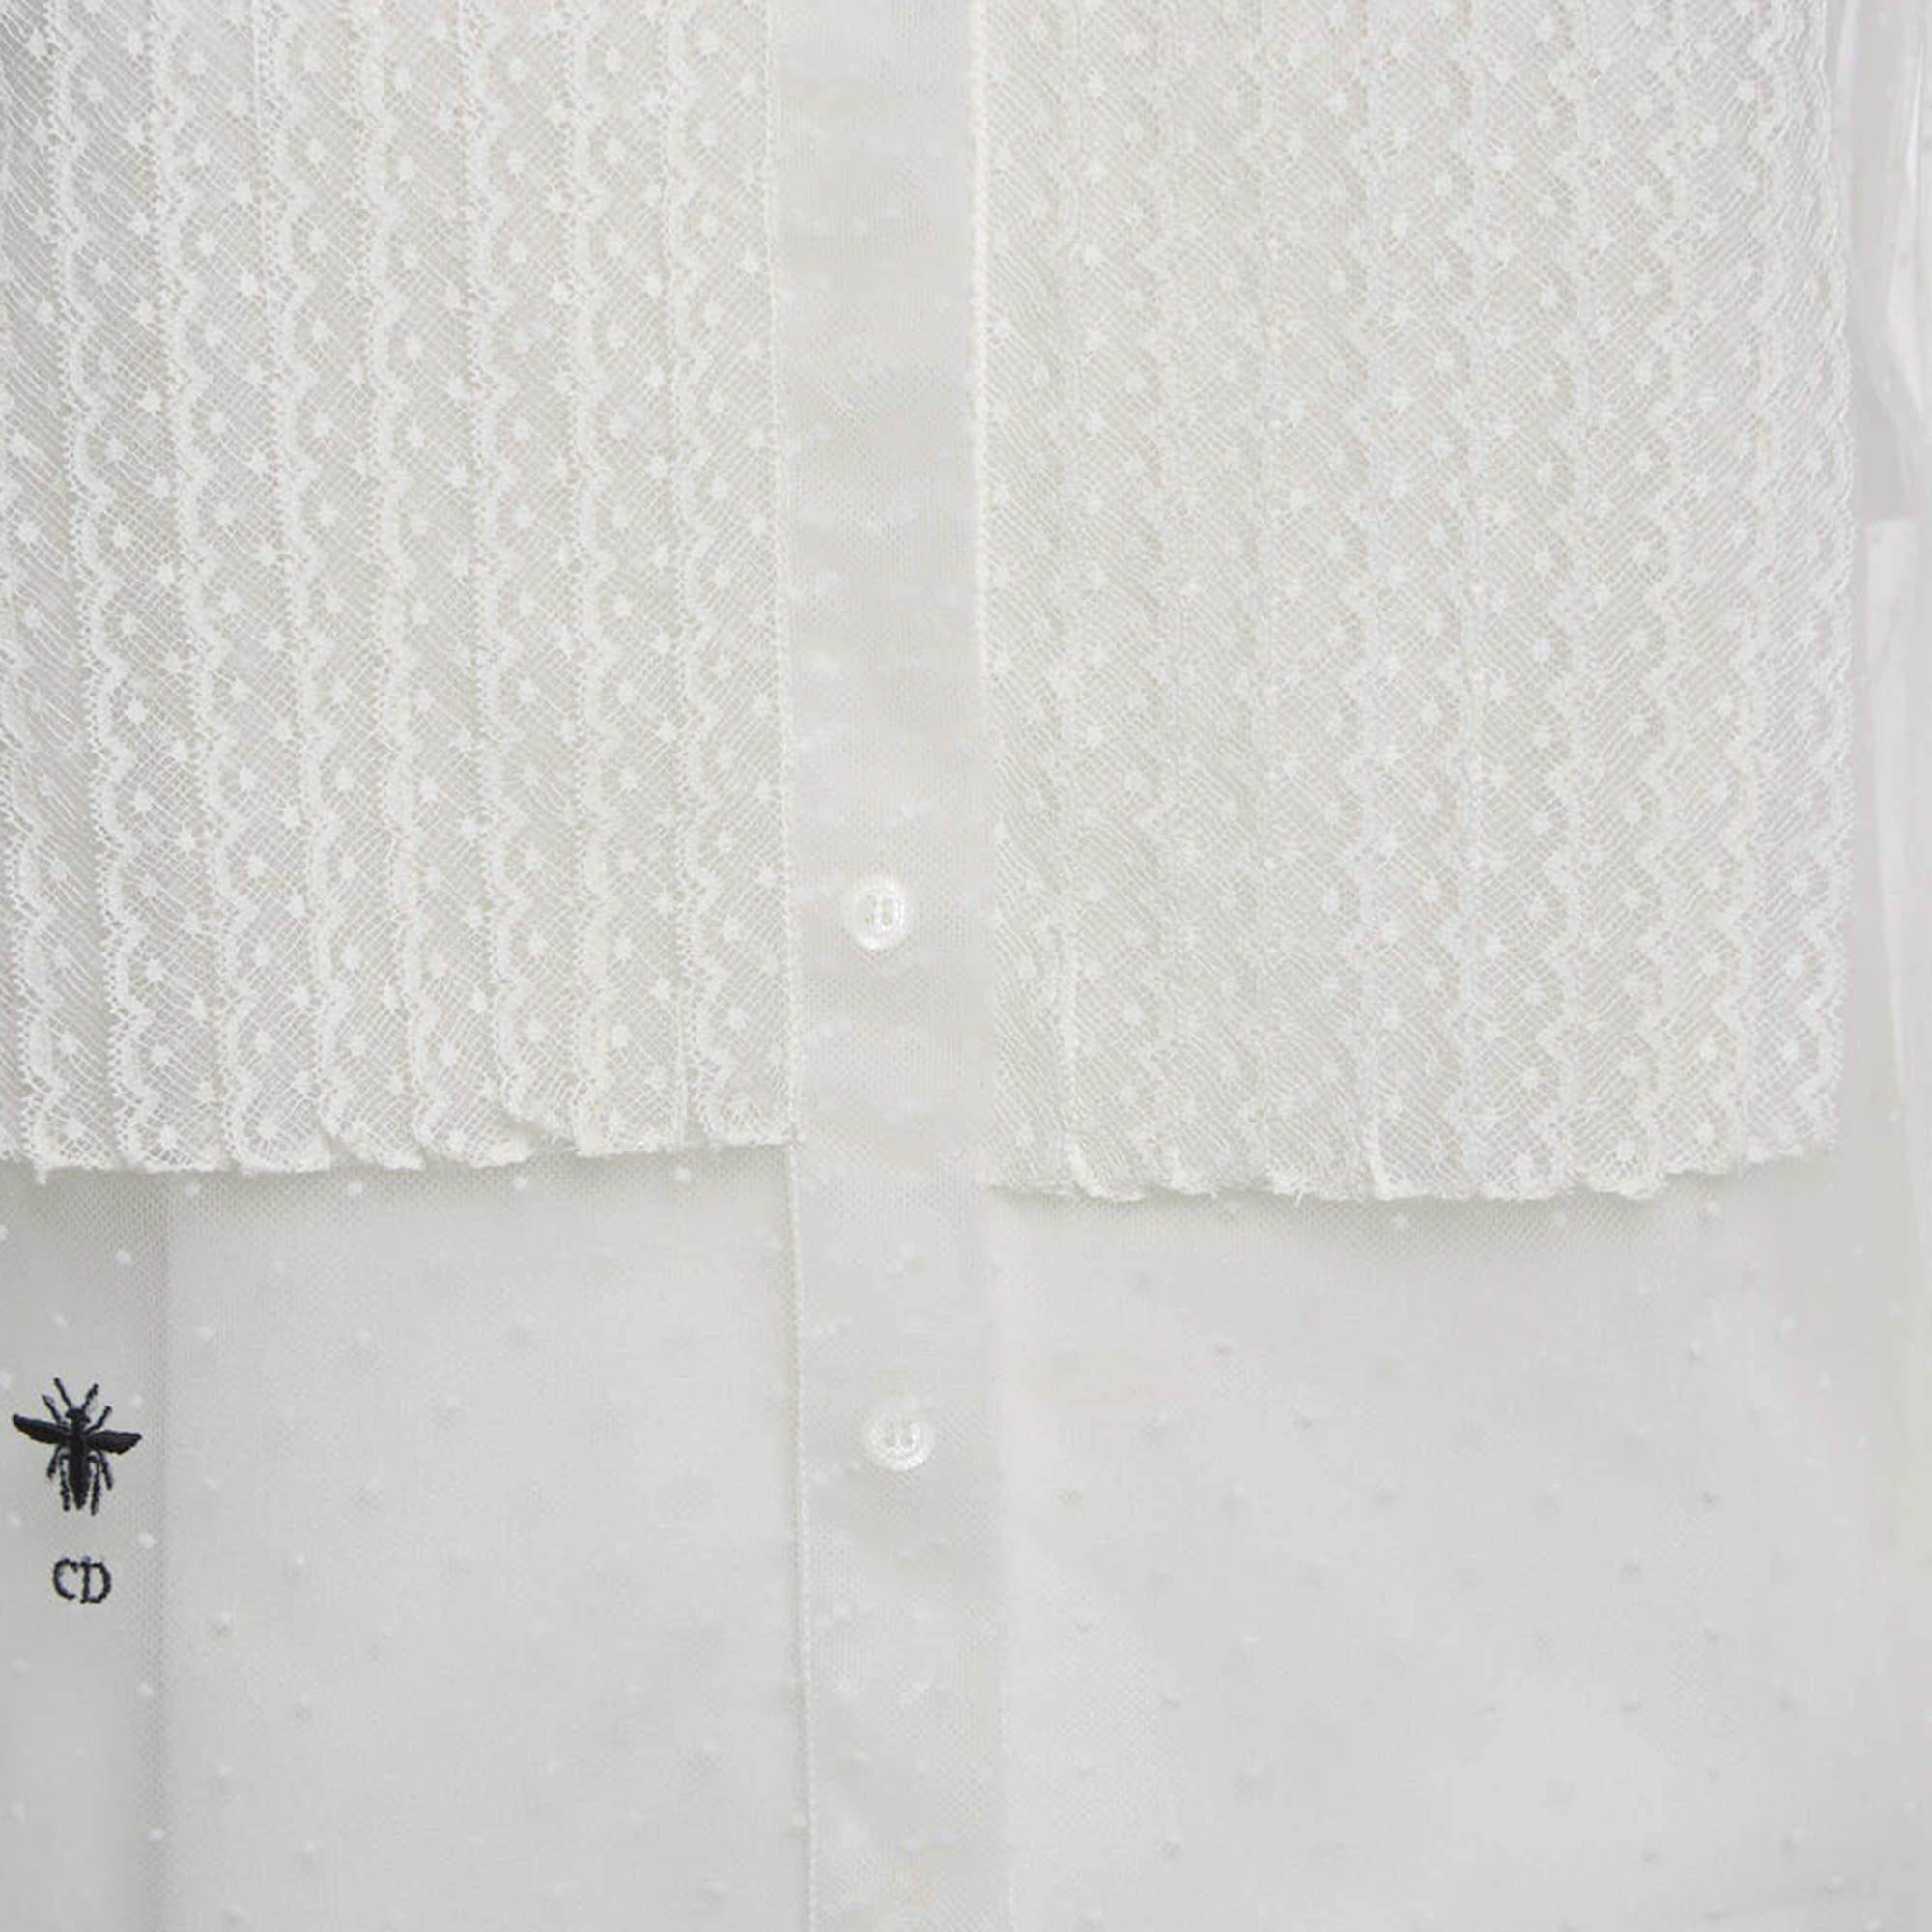 Christian Dior White Dotted Tulle Blouse S In Excellent Condition For Sale In Dubai, Al Qouz 2